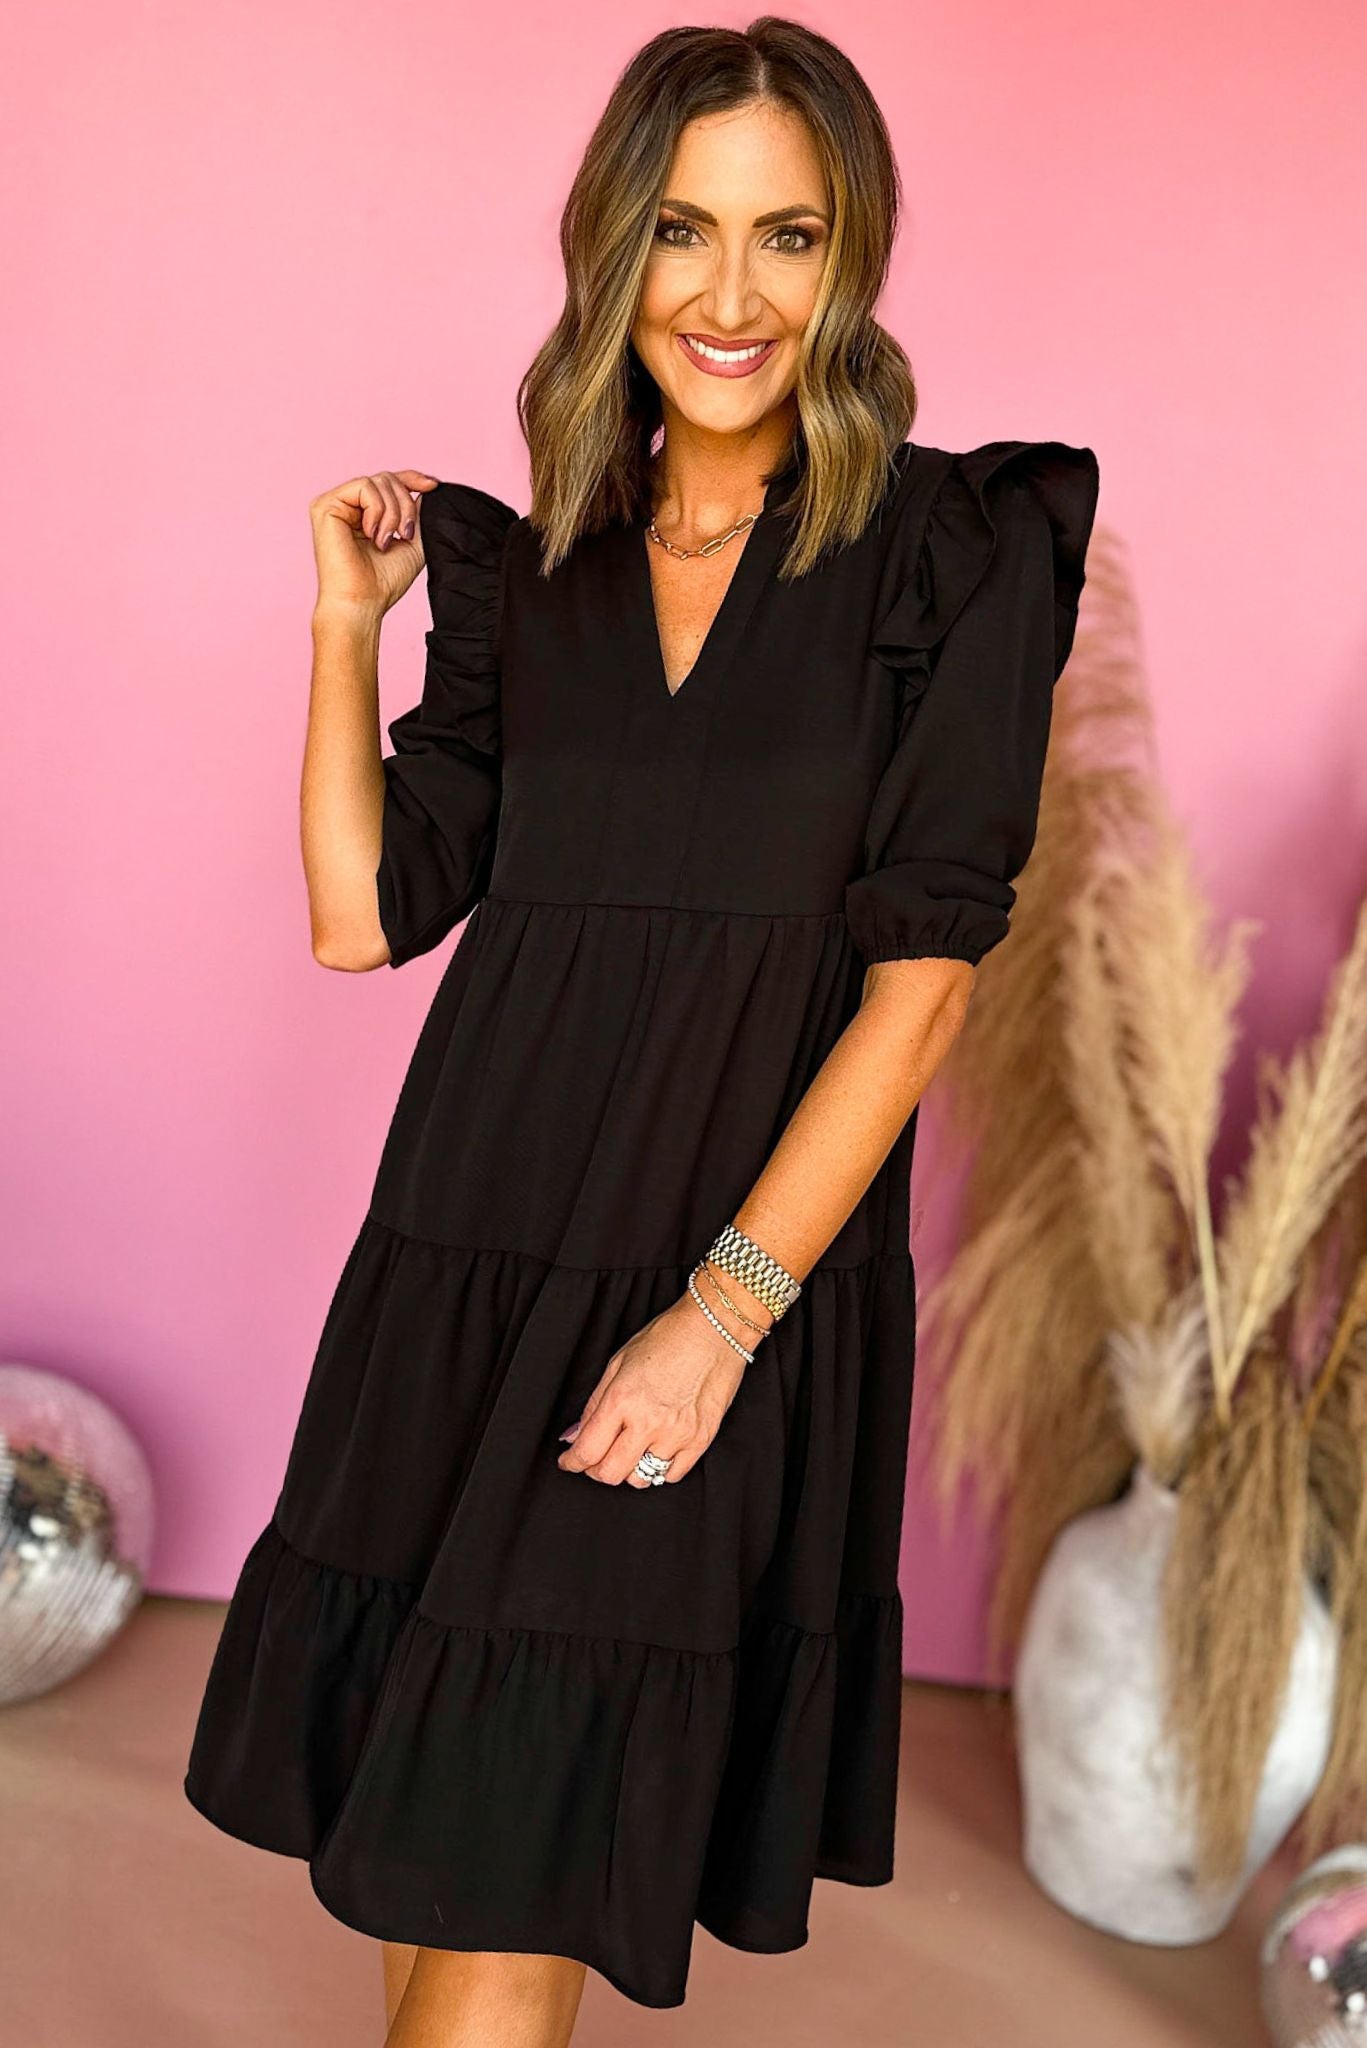 SSYS The Morgan Dress In Black, ssys the label,elevated dress, elevated style, mom style, must have dress, must have style, church style, fall dress, fall style, shop style your senses by mallory fitzsimmons